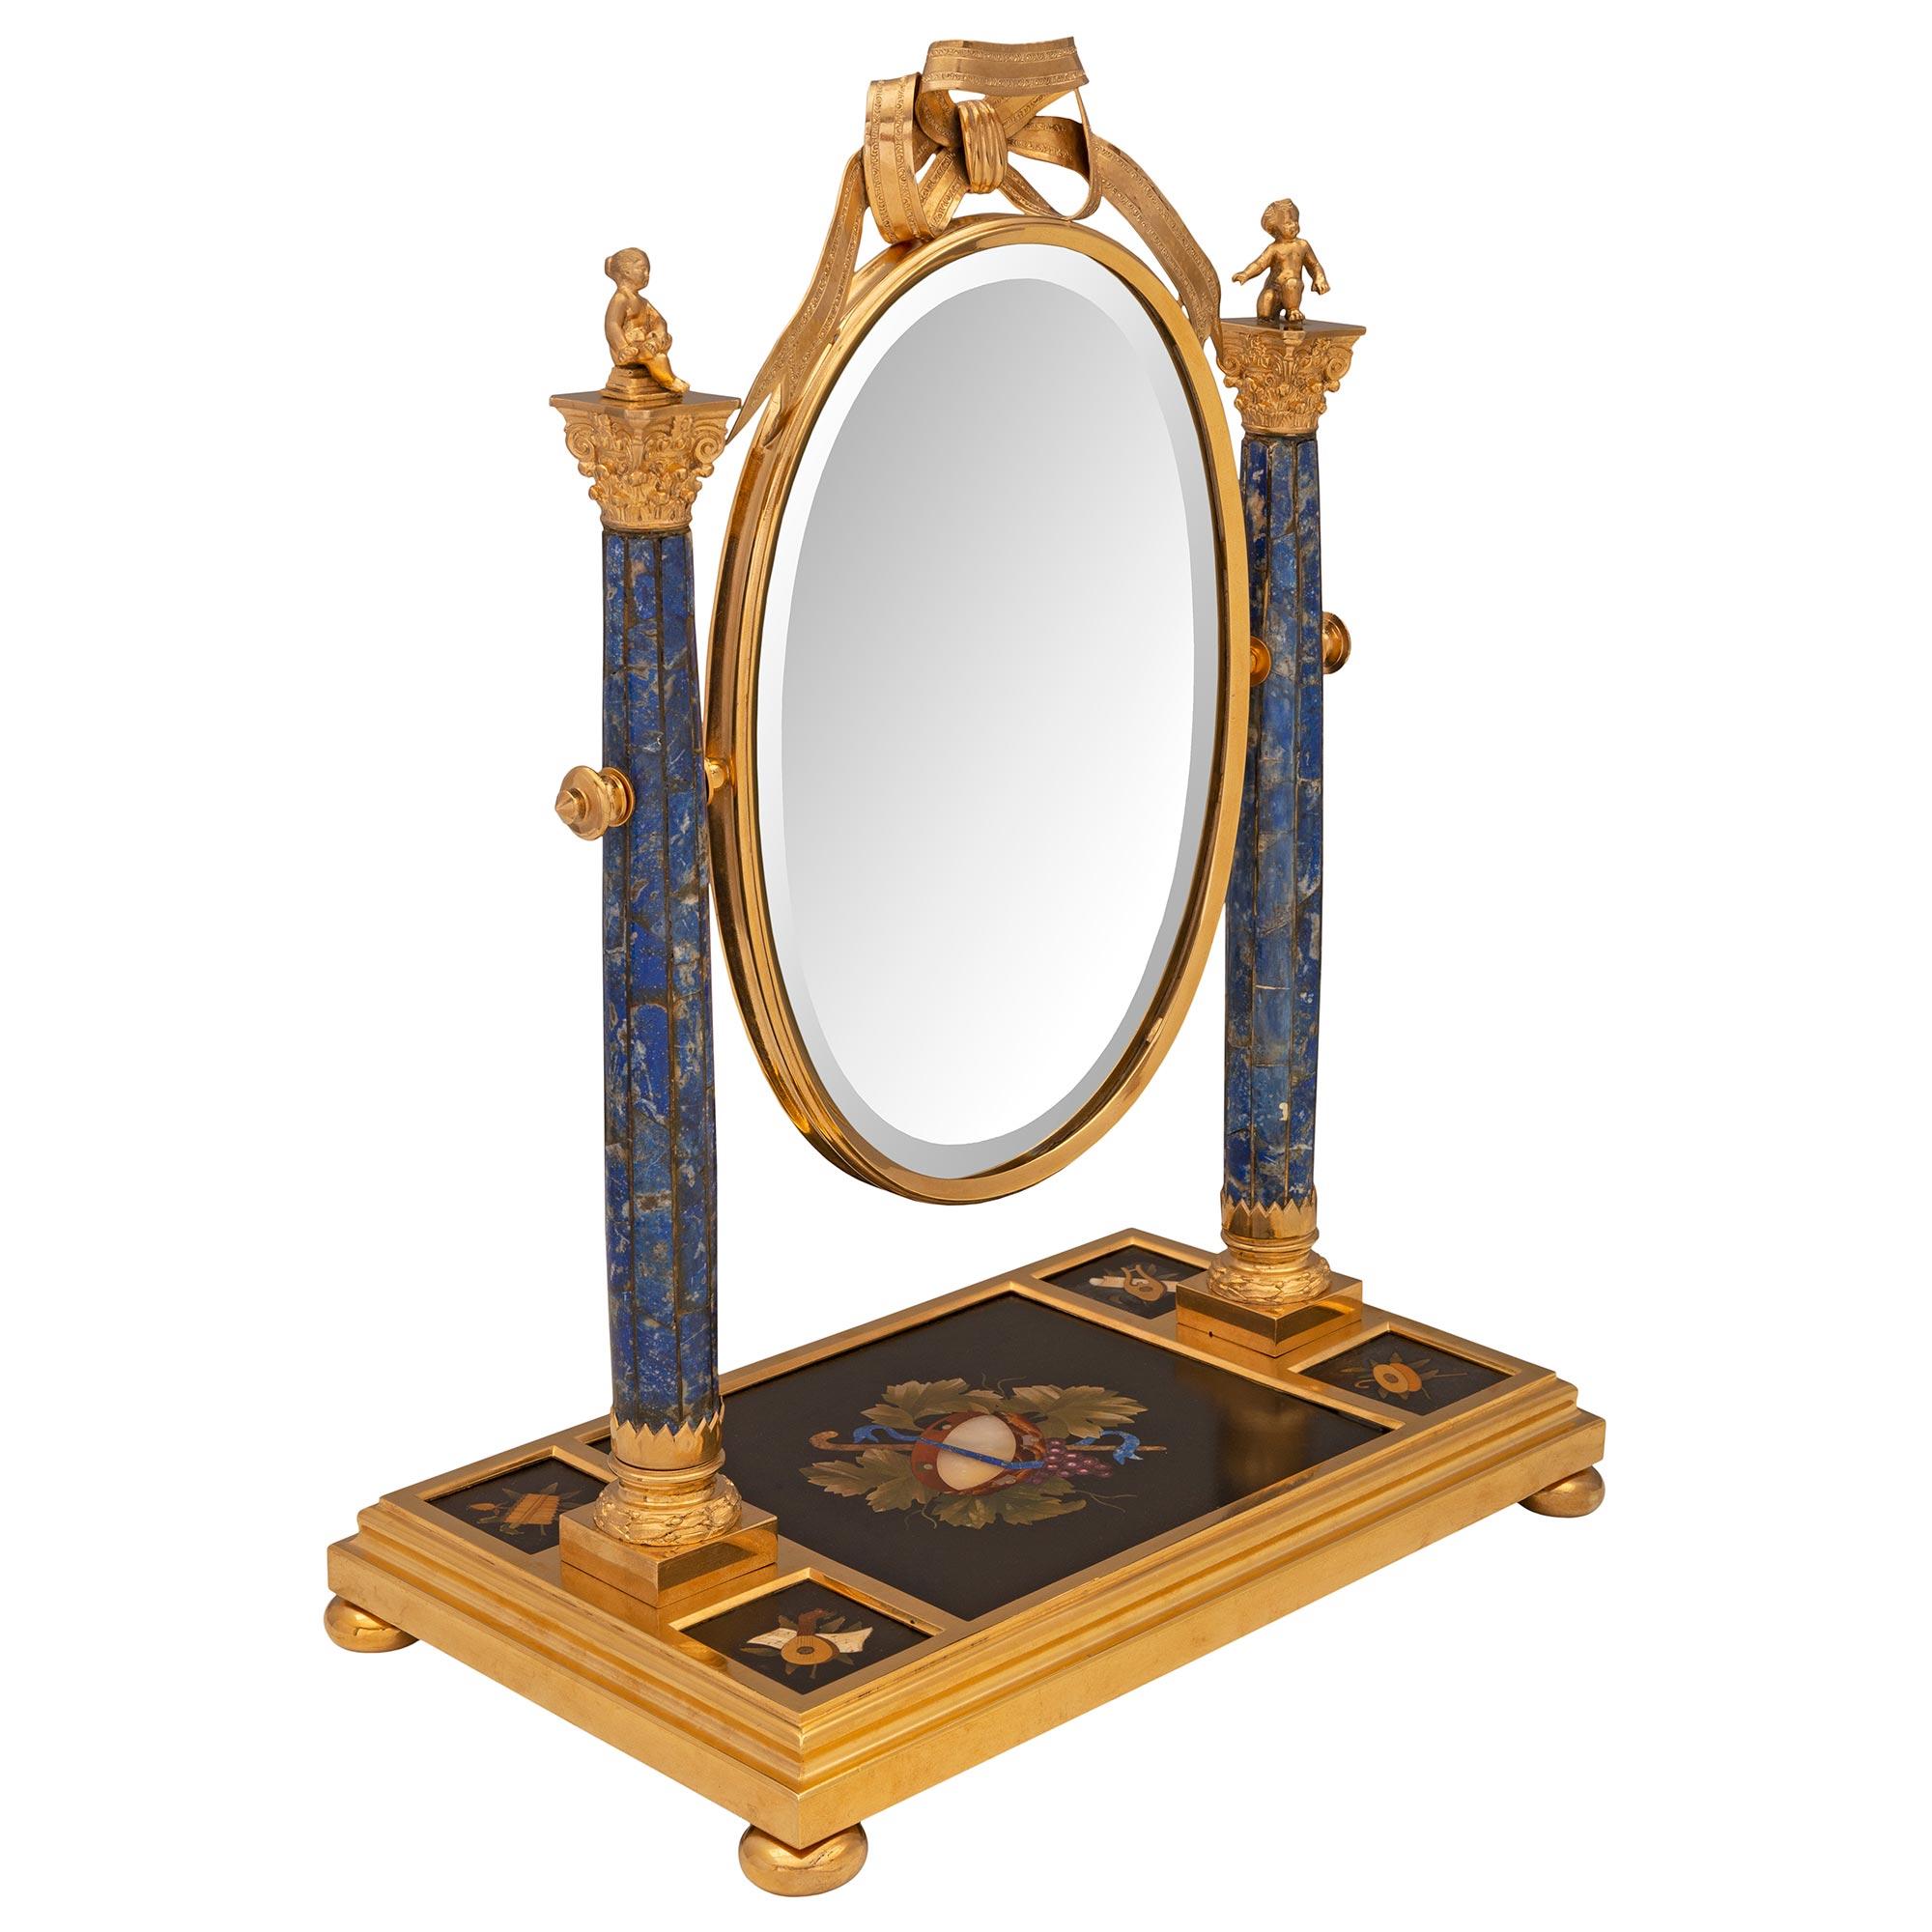 A stunning French mid 19th century Louis XVI st. ormolu, Lapis Lazuli and Pietra Dura vanity mirror. This exceptional and most unique mirror is raised by a rectangular ormolu base with a fine mottled border and lovely ball feet. The base displays